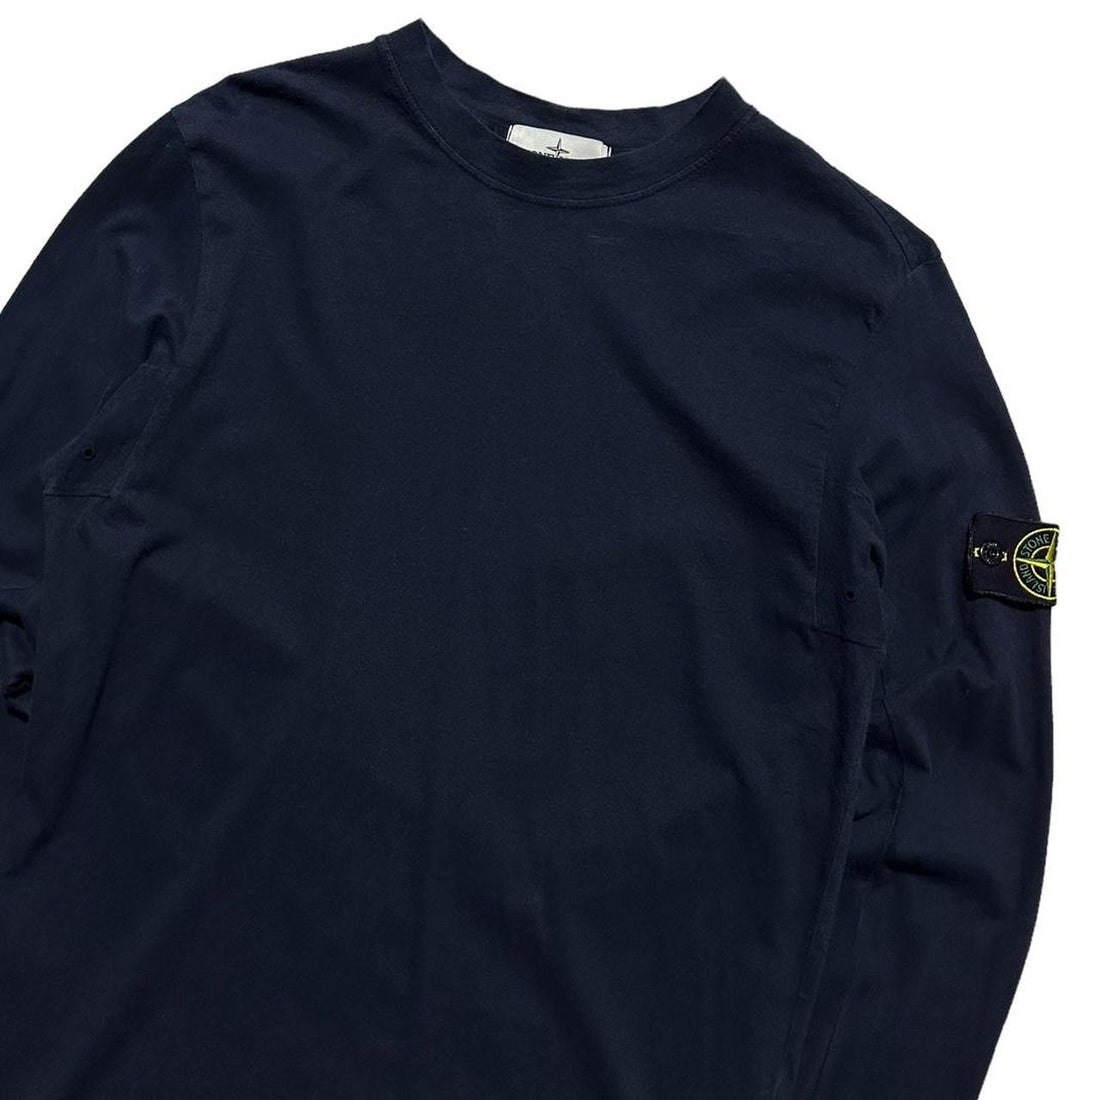 Stone Island Navy Pullover Long Sleeve Top